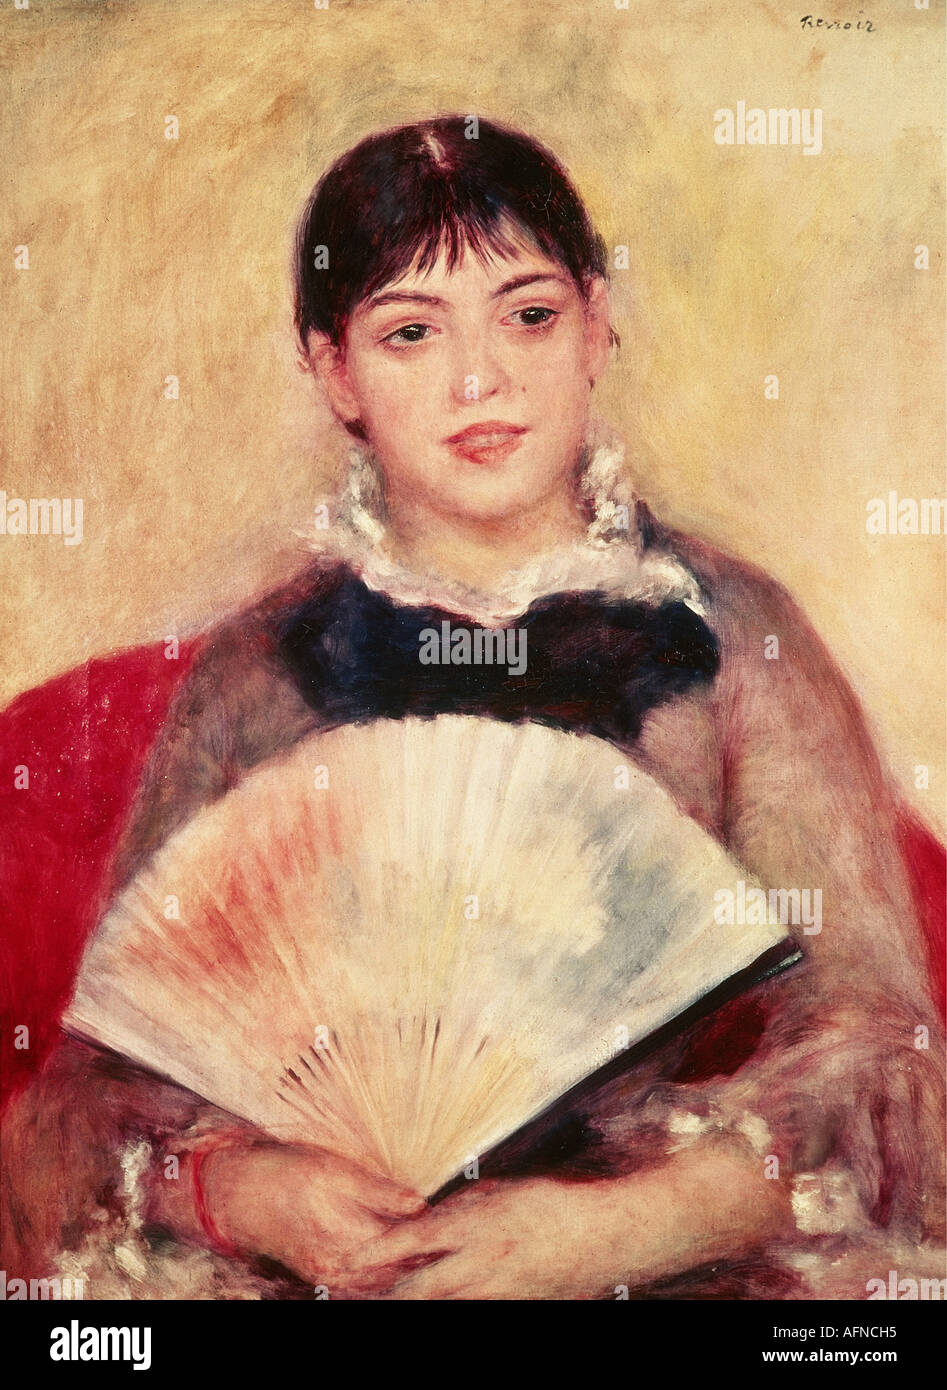 'fine arts, Renoir, Auguste (25.2.1841 - 3.12.1919), painting 'Girl with a fan', 1881, oil on canvas, 65 x 50 cm, Hermitage St Stock Photo